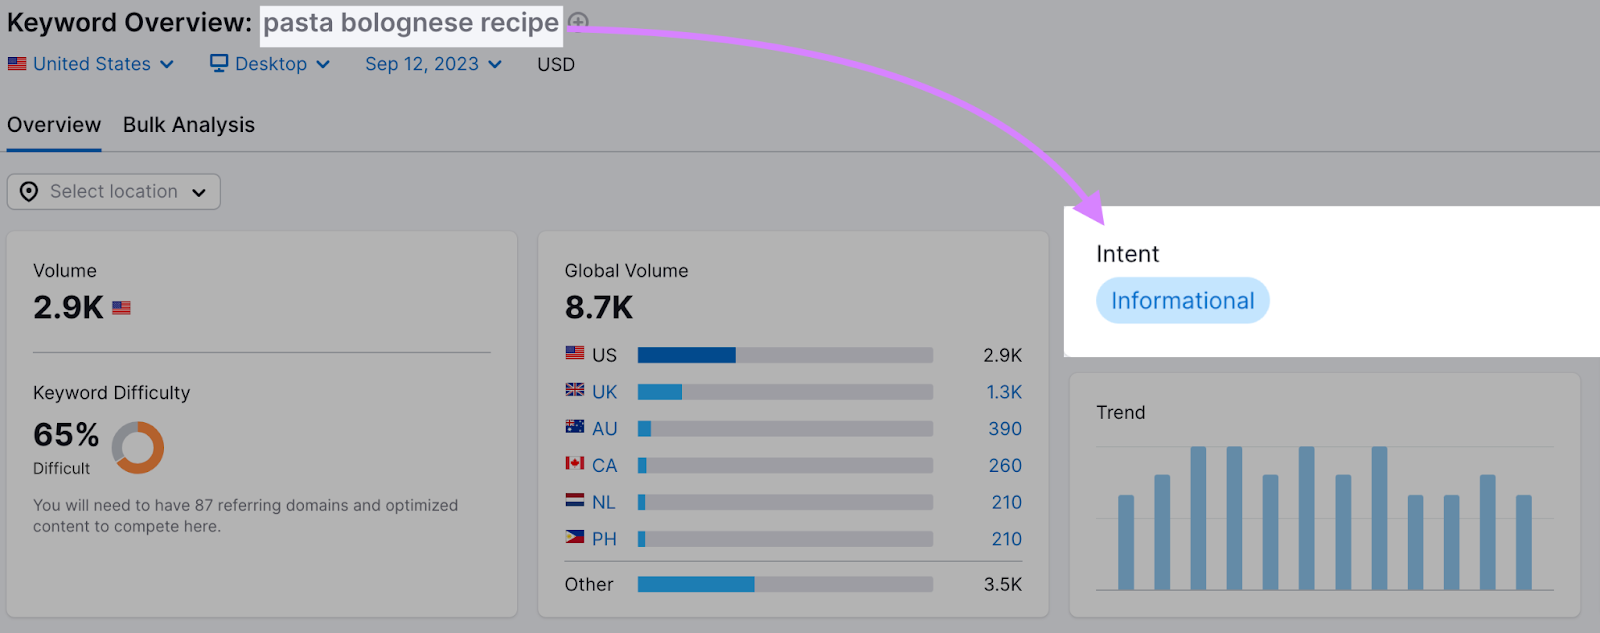 "pasta bolognese recipe" keyword shows informational search intent in Keyword Overview tool